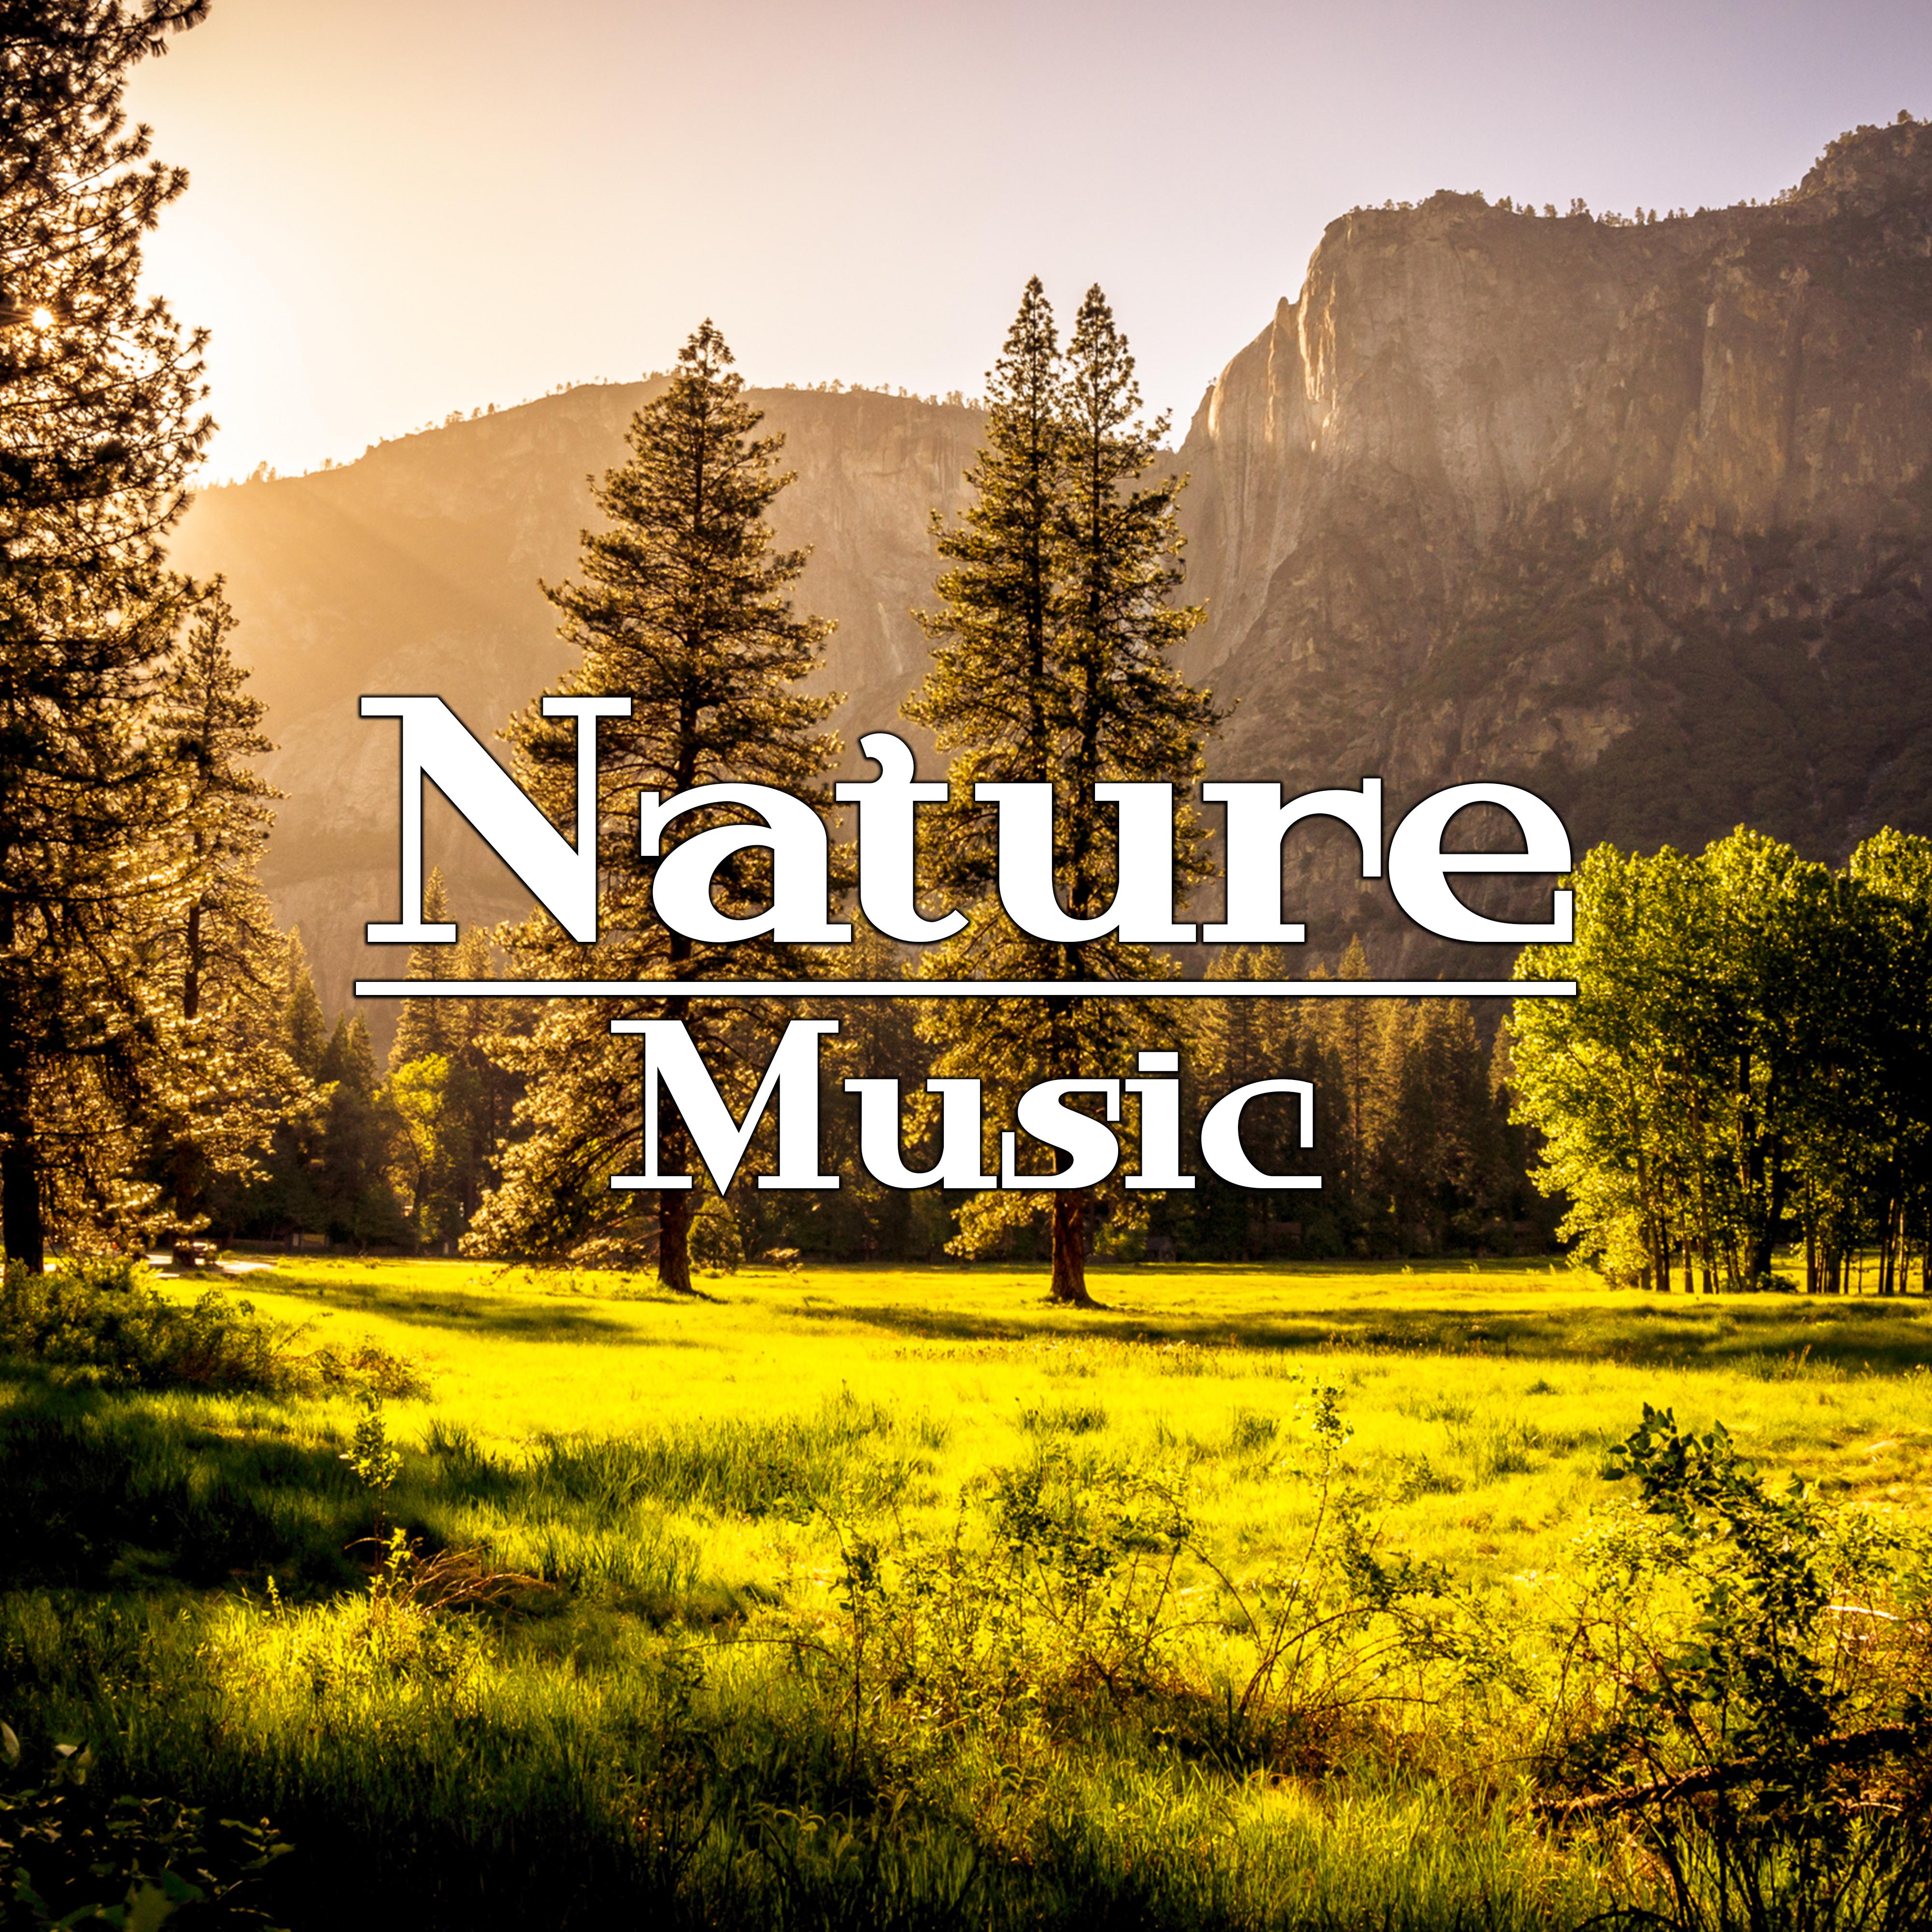 Nature Music  Espana New Age, Music 2017, Relaxing Melodies, Full of Calmness